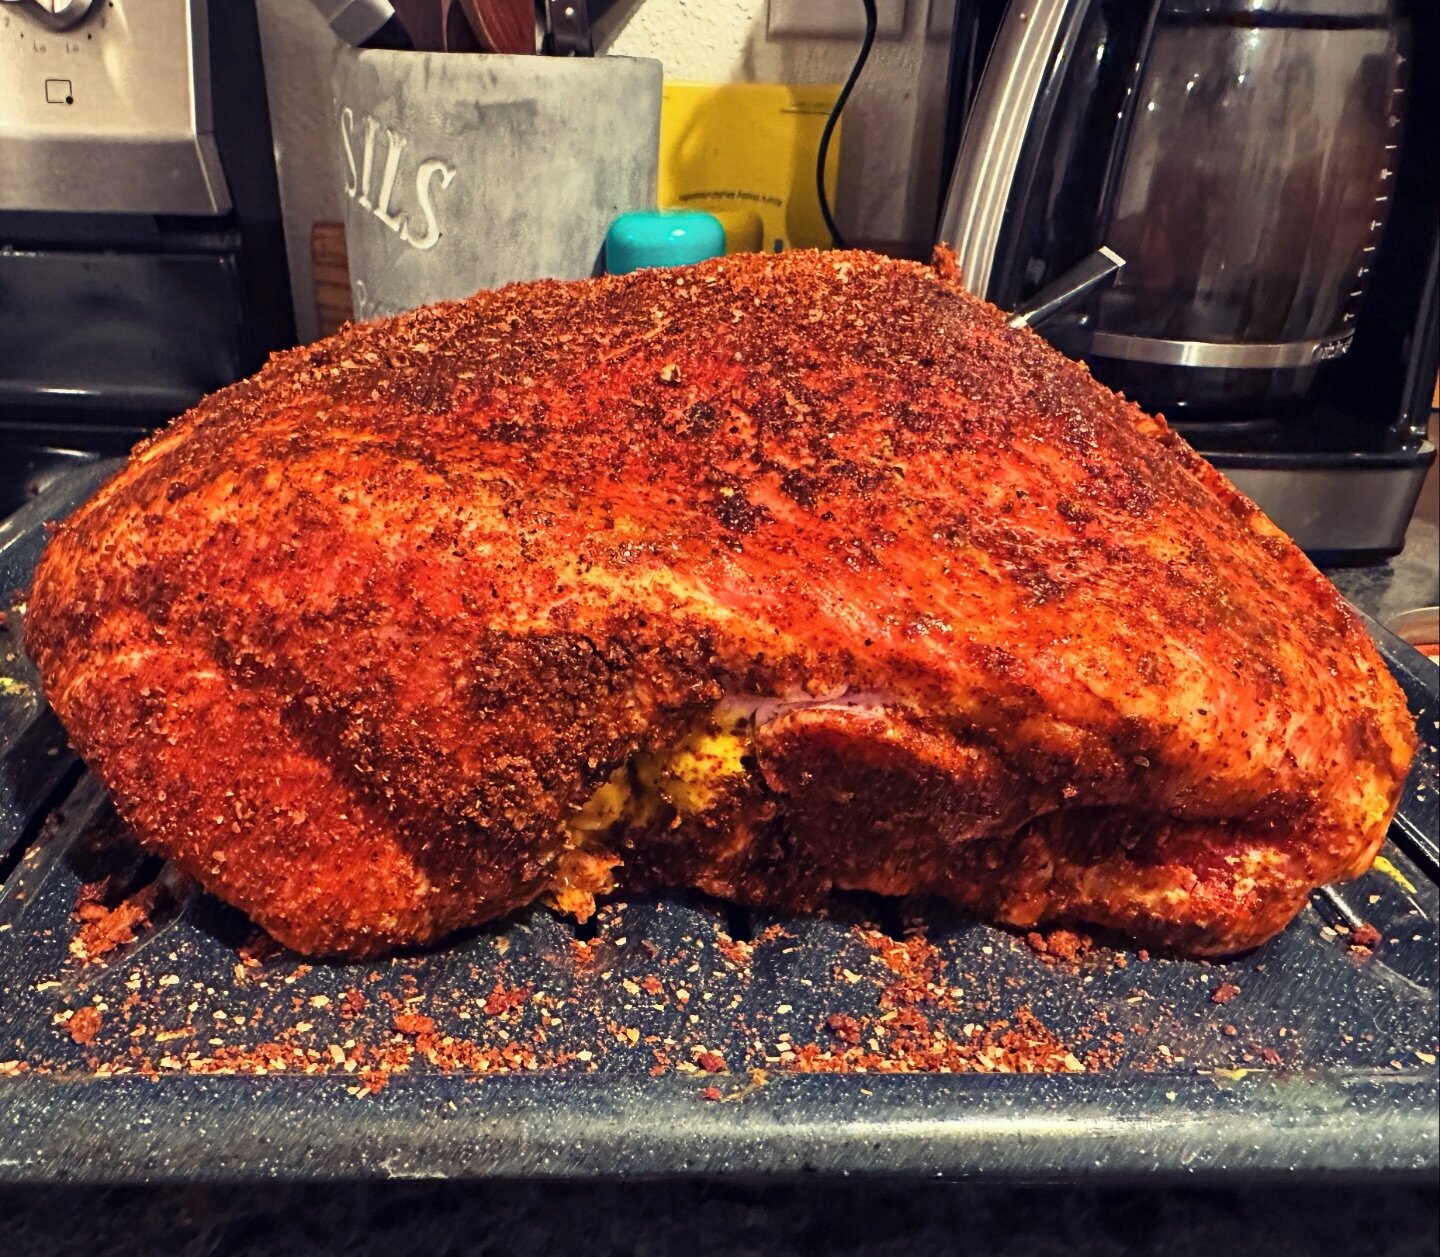 Pork butt for my gang at @the_wrap_agency going in the oven late tonight. I will be using my @meaterofficial thermometer as an alarm clock and the smell of pulled pork as my coffee. 

#bbq #food #foodporn #foodie #barbecue #grill #instafood #meat #bb